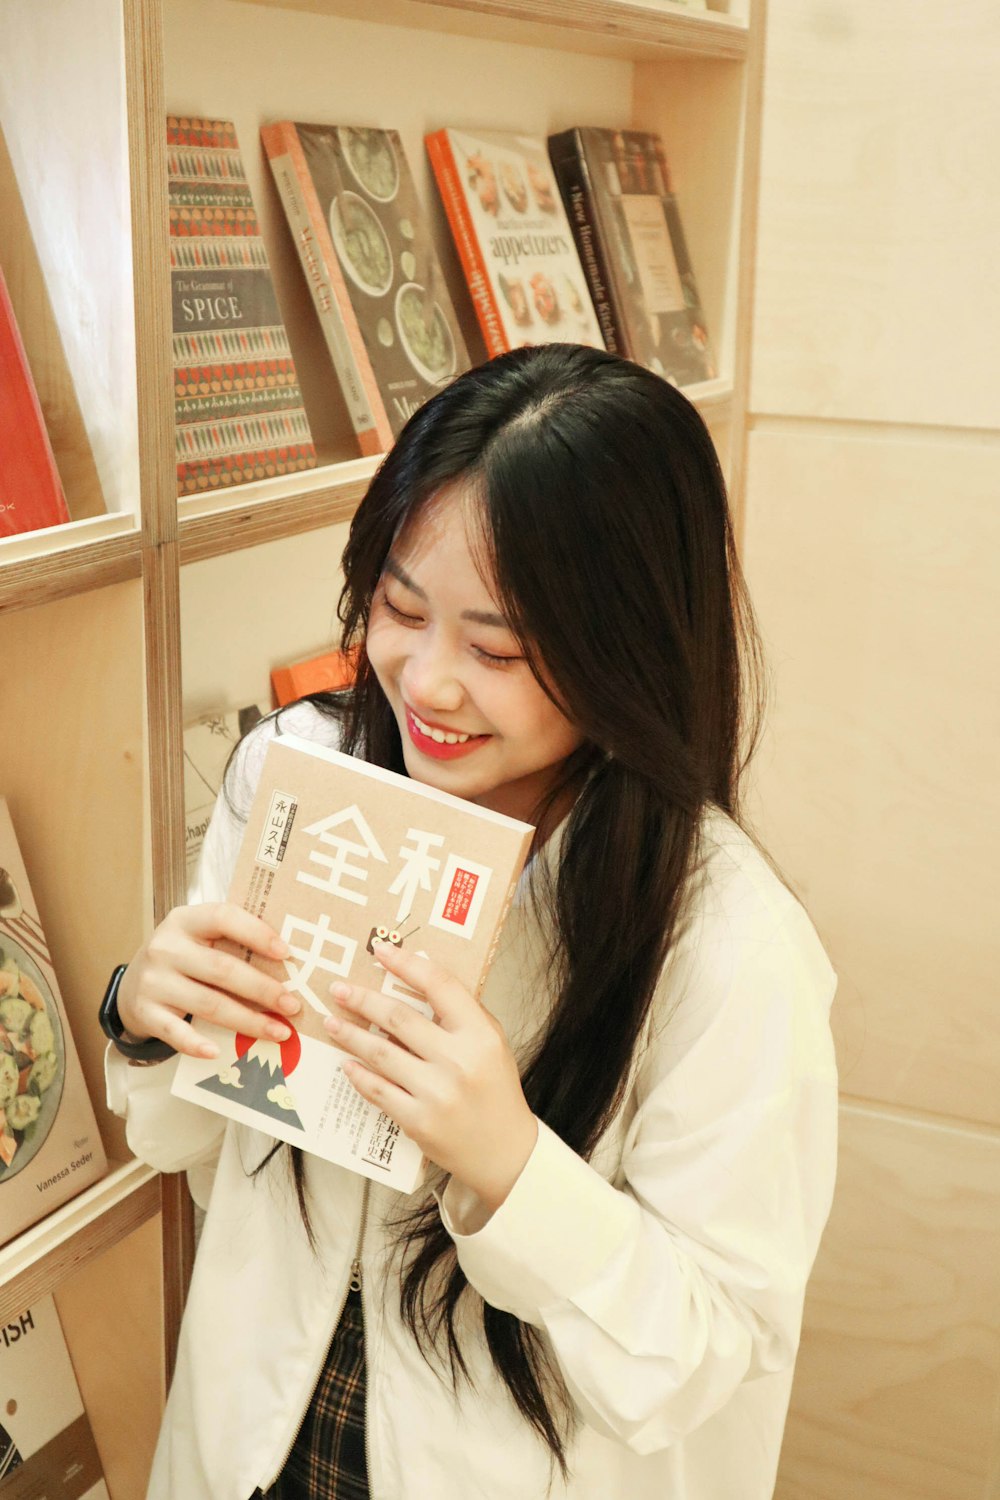 a woman holding a book in front of a bookshelf